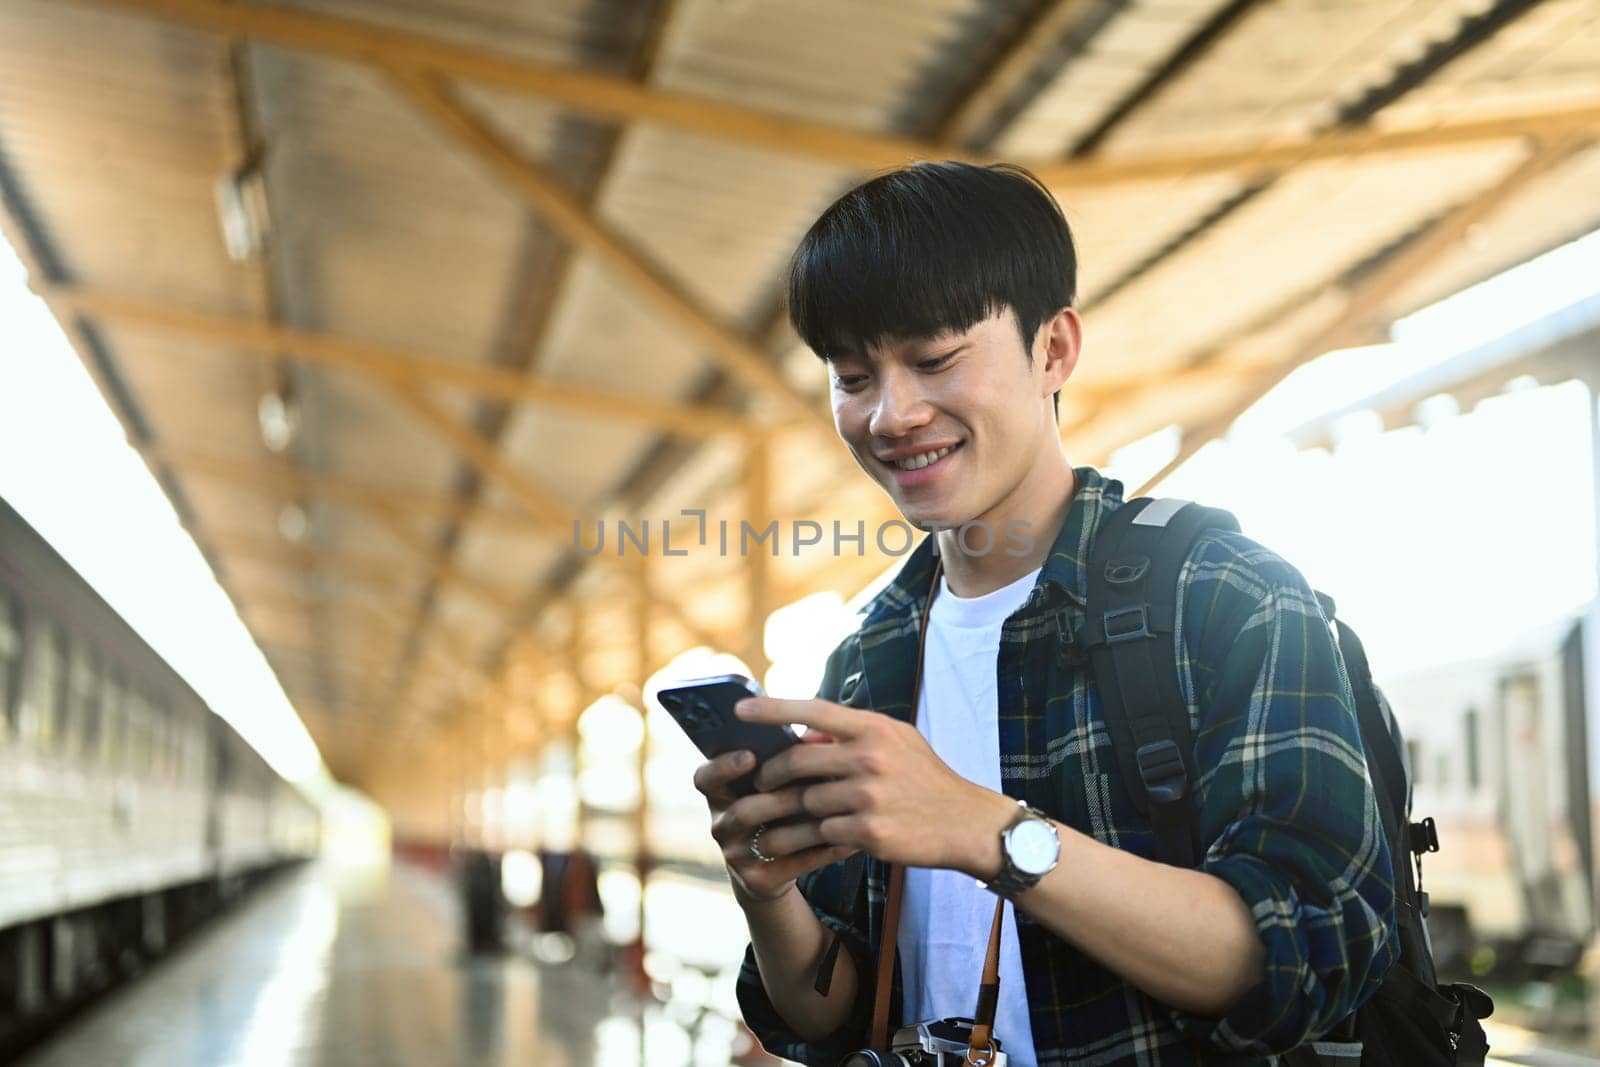 Smiling young man standing on the platform of a train station and using mobile phone.